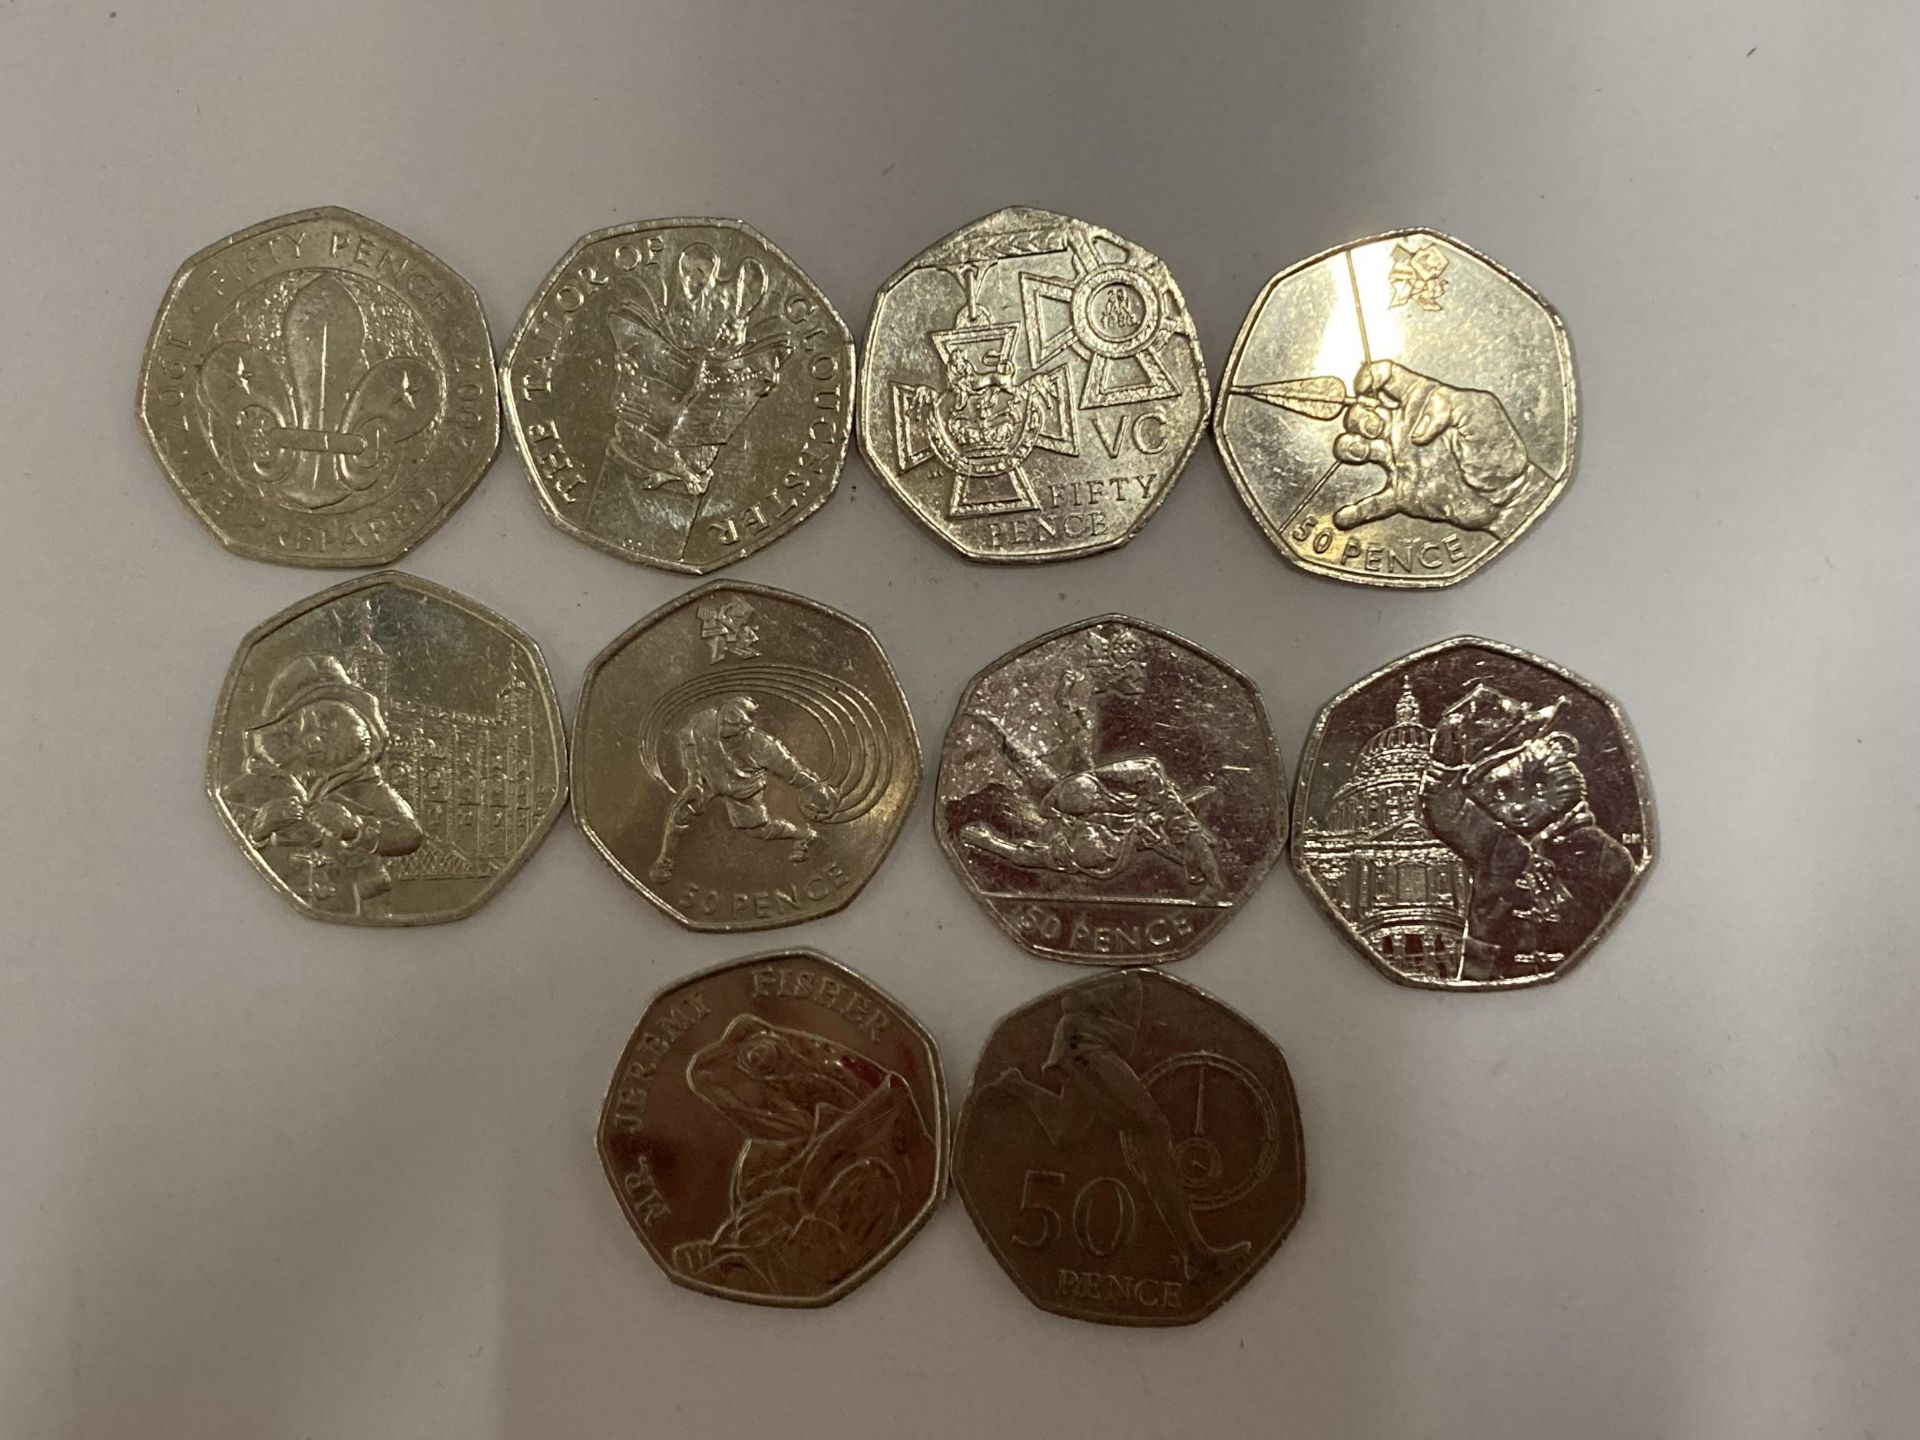 TEN VARIOUS COLLECTABLE FIFTY PENCE PIECES TO INCLUDE PADDINGTON BEAR, JEREMY FISHER, OLYMPICS ETC - Image 2 of 3